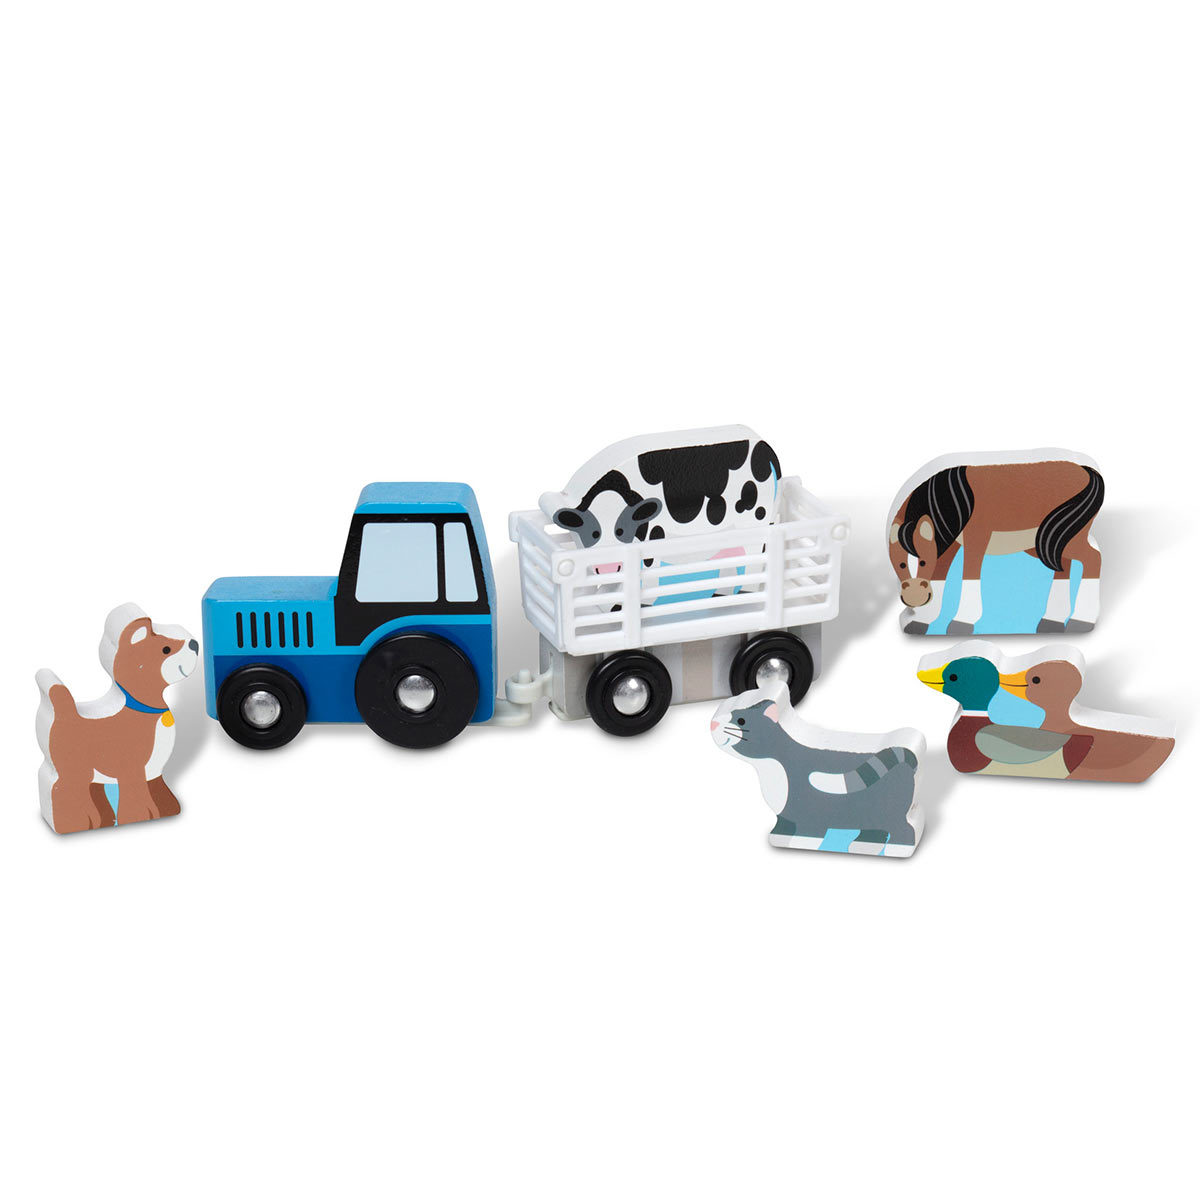 Deluxe wooden town and vehicles play set individual pieces